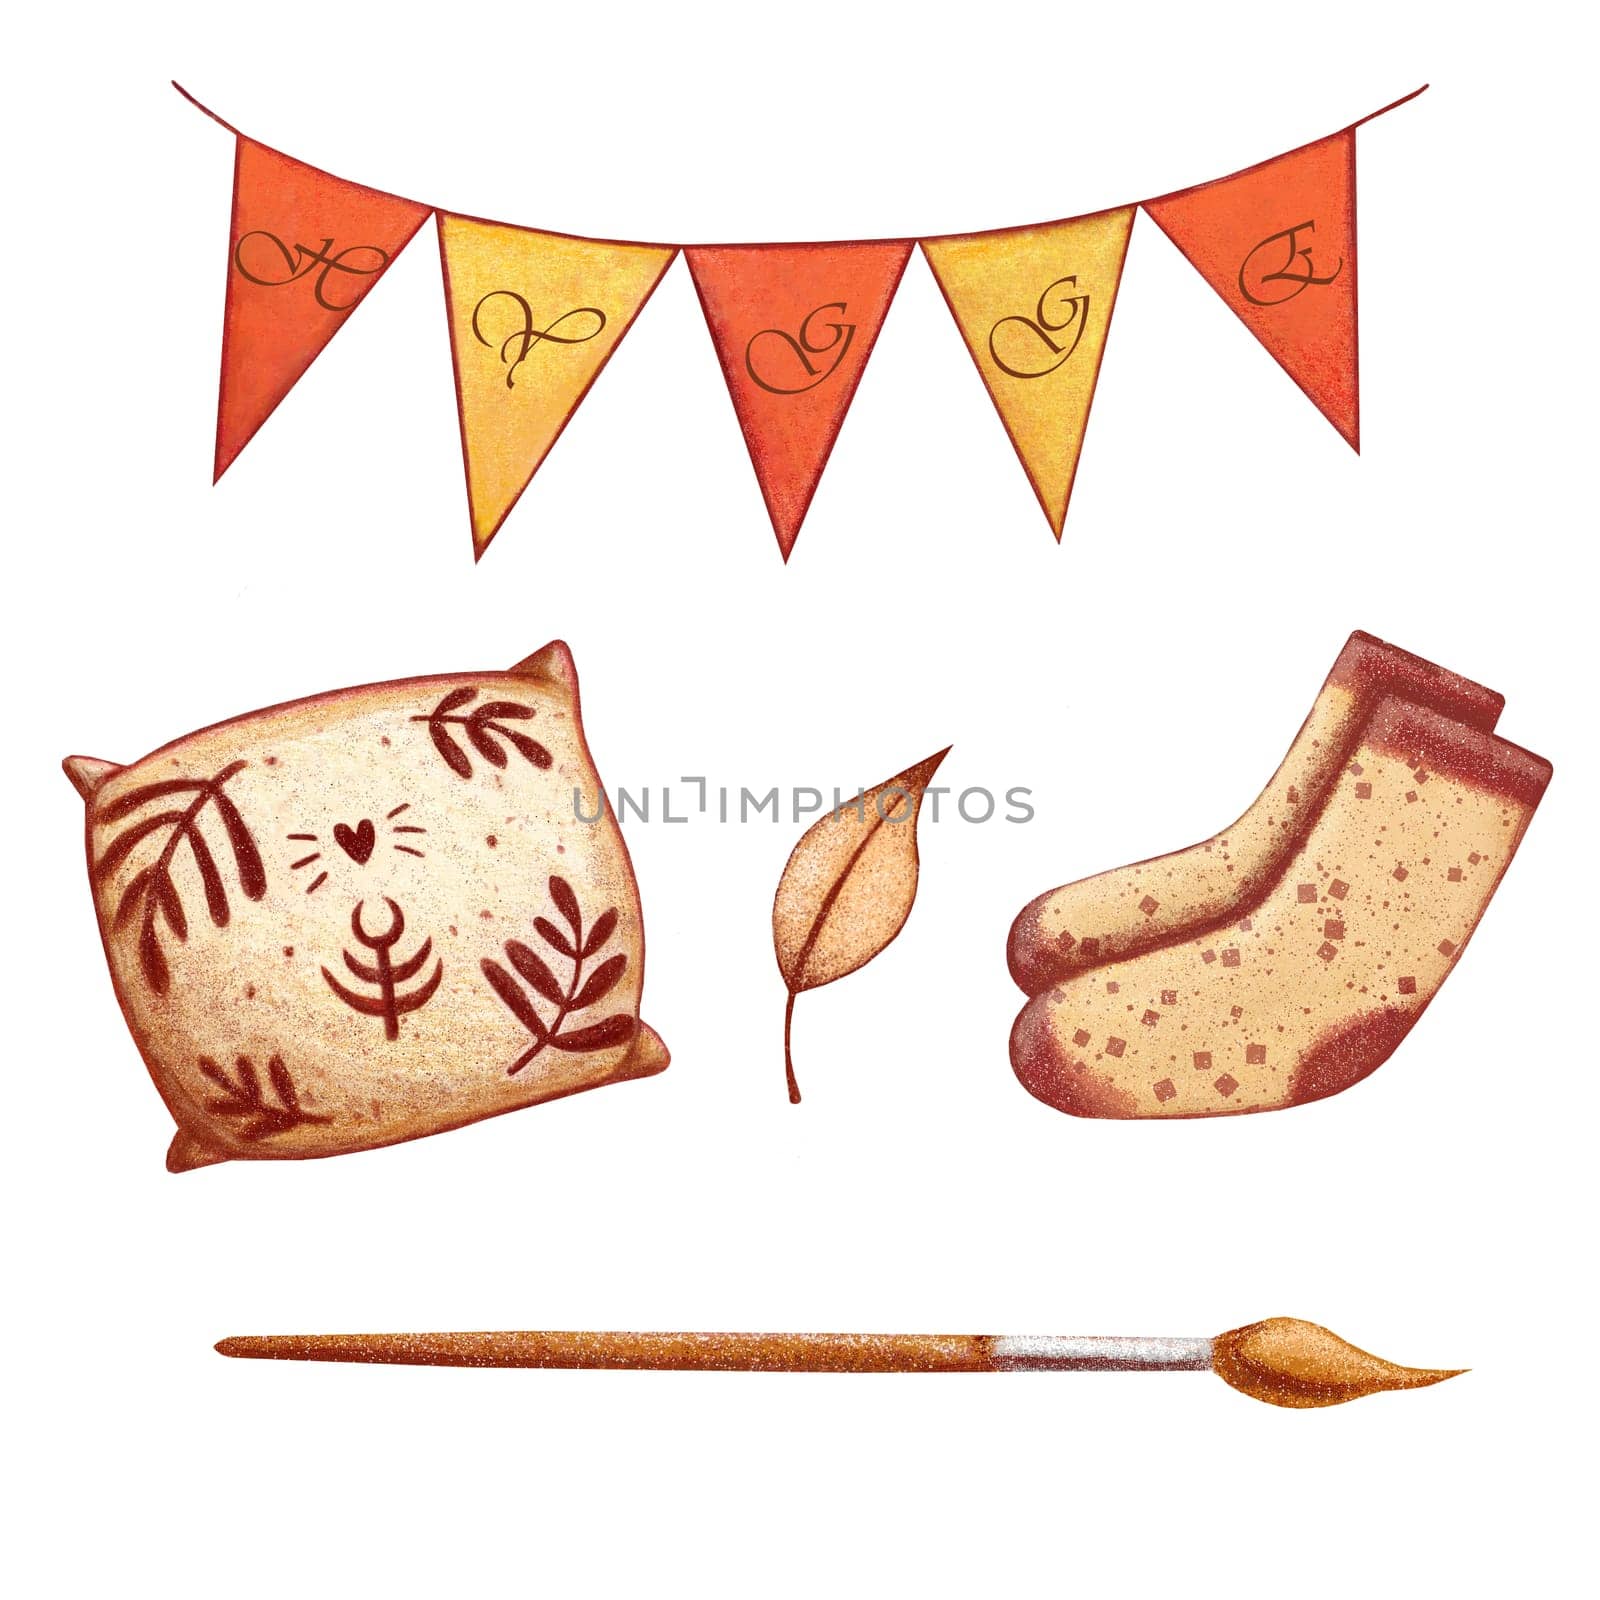 Hand drawn cute hygge autumn illustration cozy set by Anny_Sketches